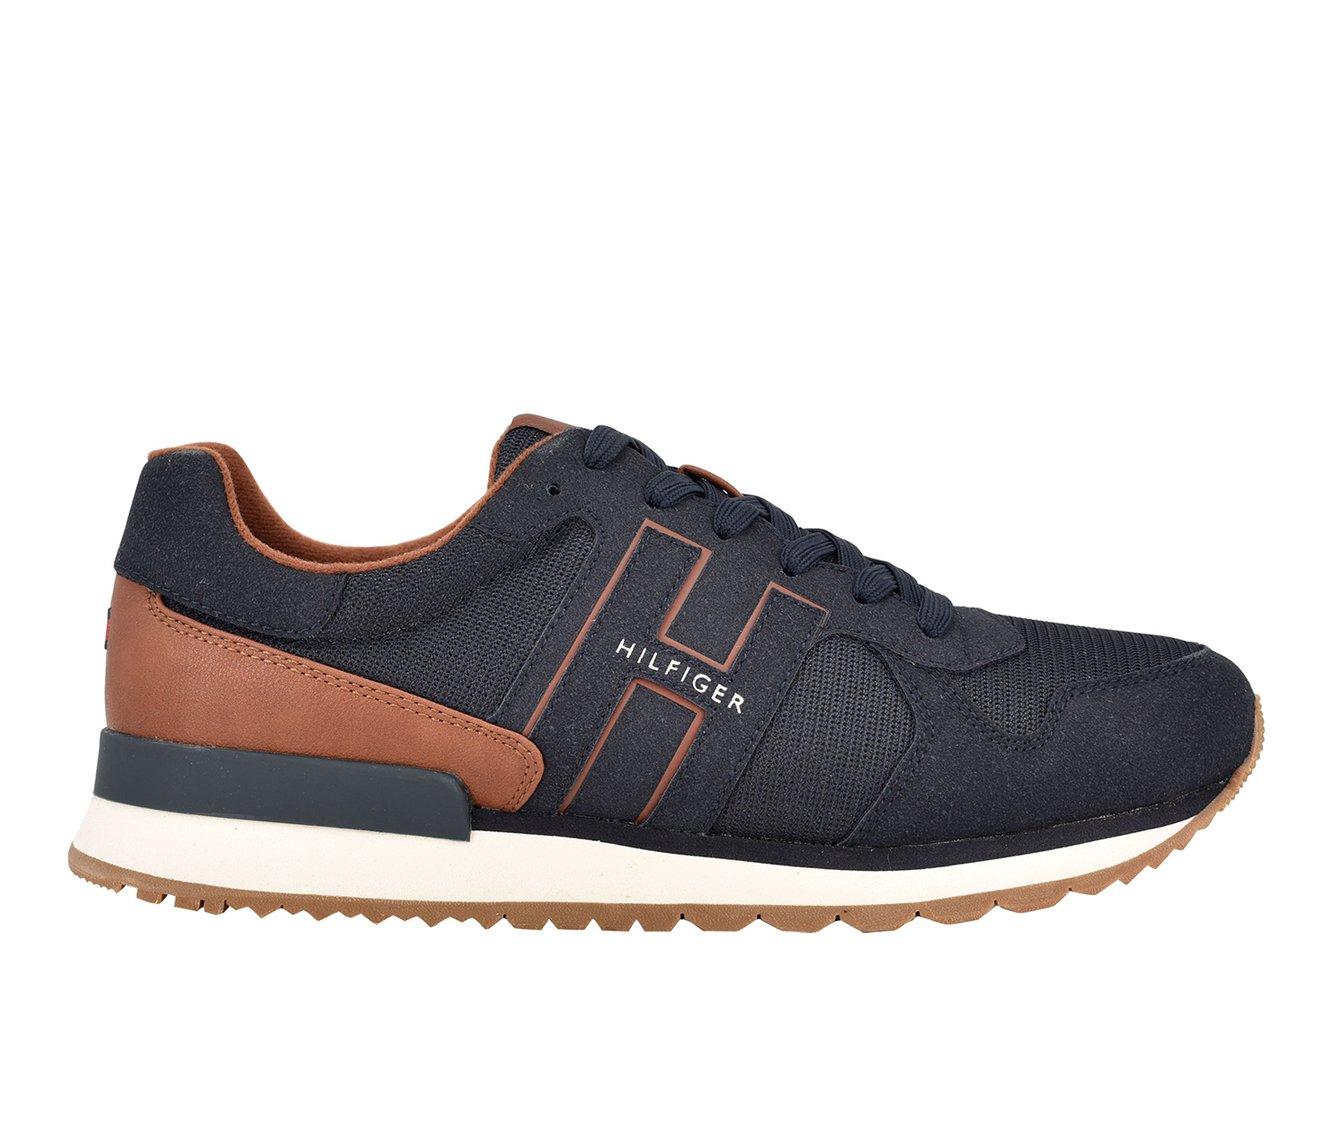 Men's Tommy Hilfiger Anello Sneakers